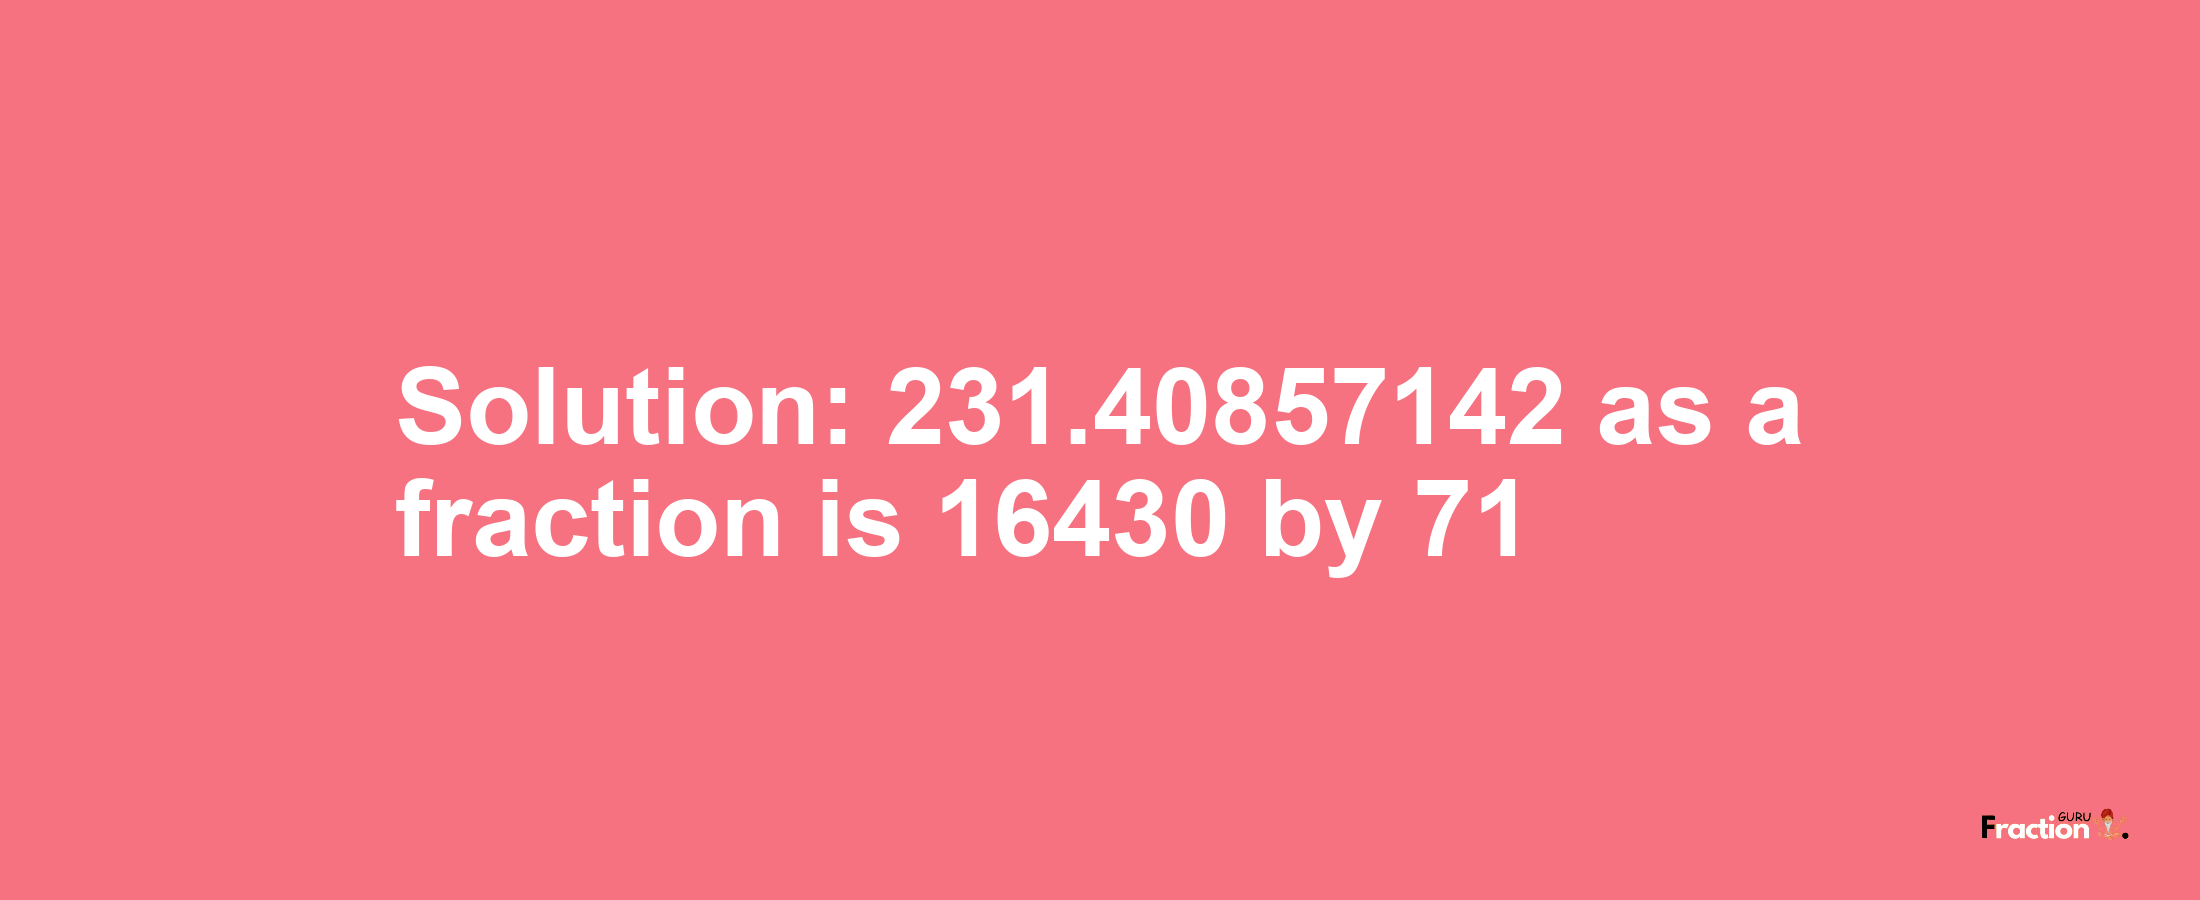 Solution:231.40857142 as a fraction is 16430/71